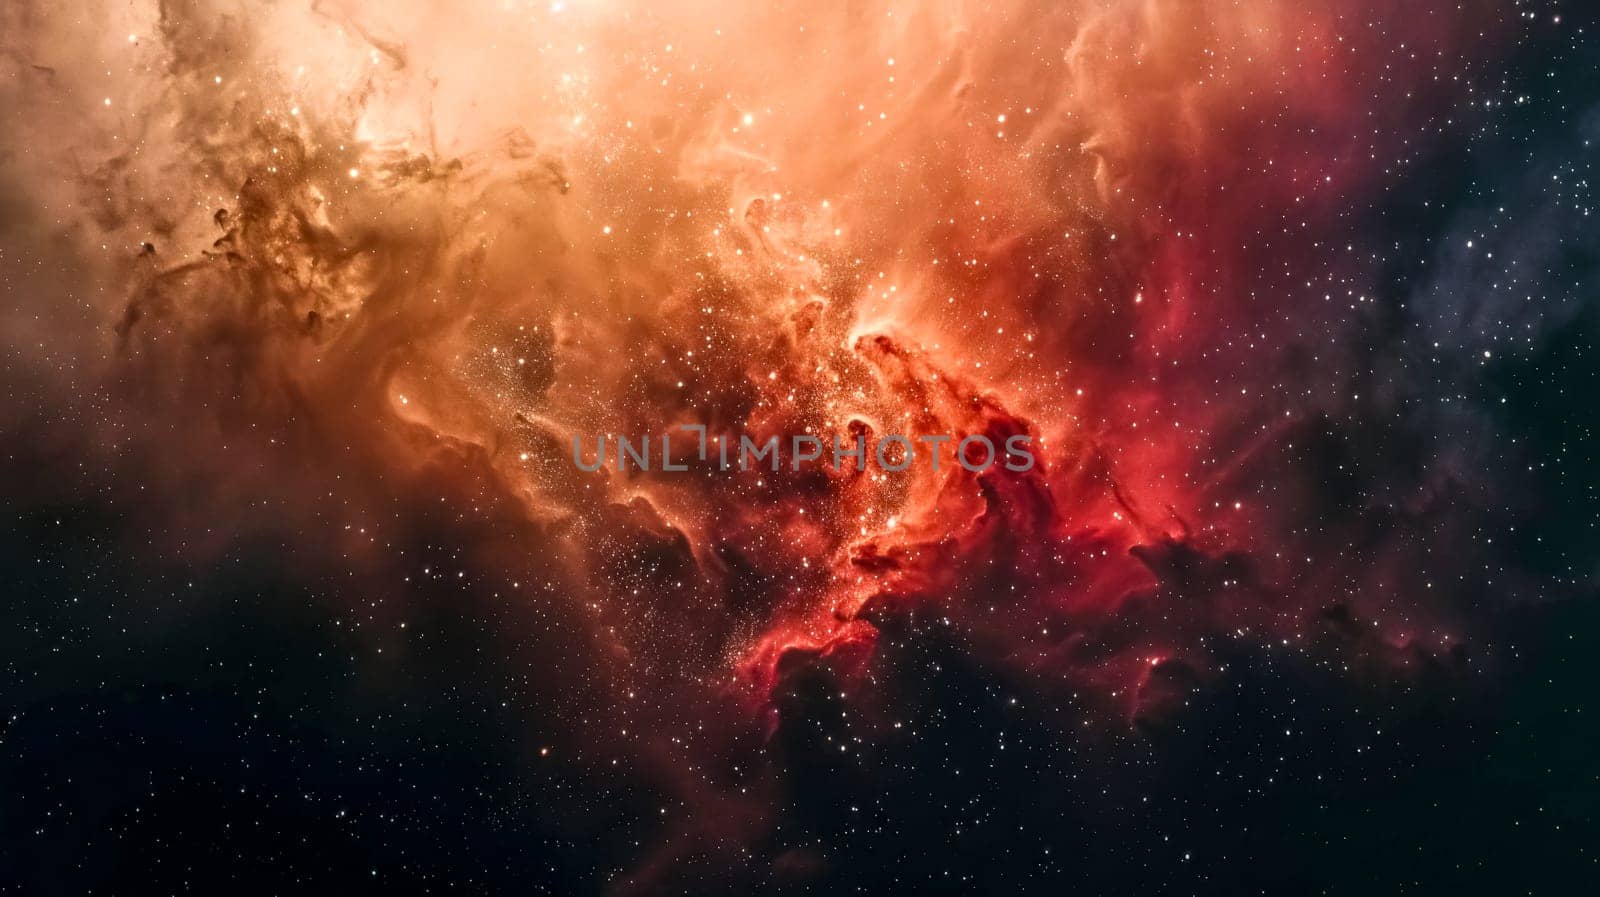 Cosmic inferno: a vibrant nebula in deep space by Edophoto